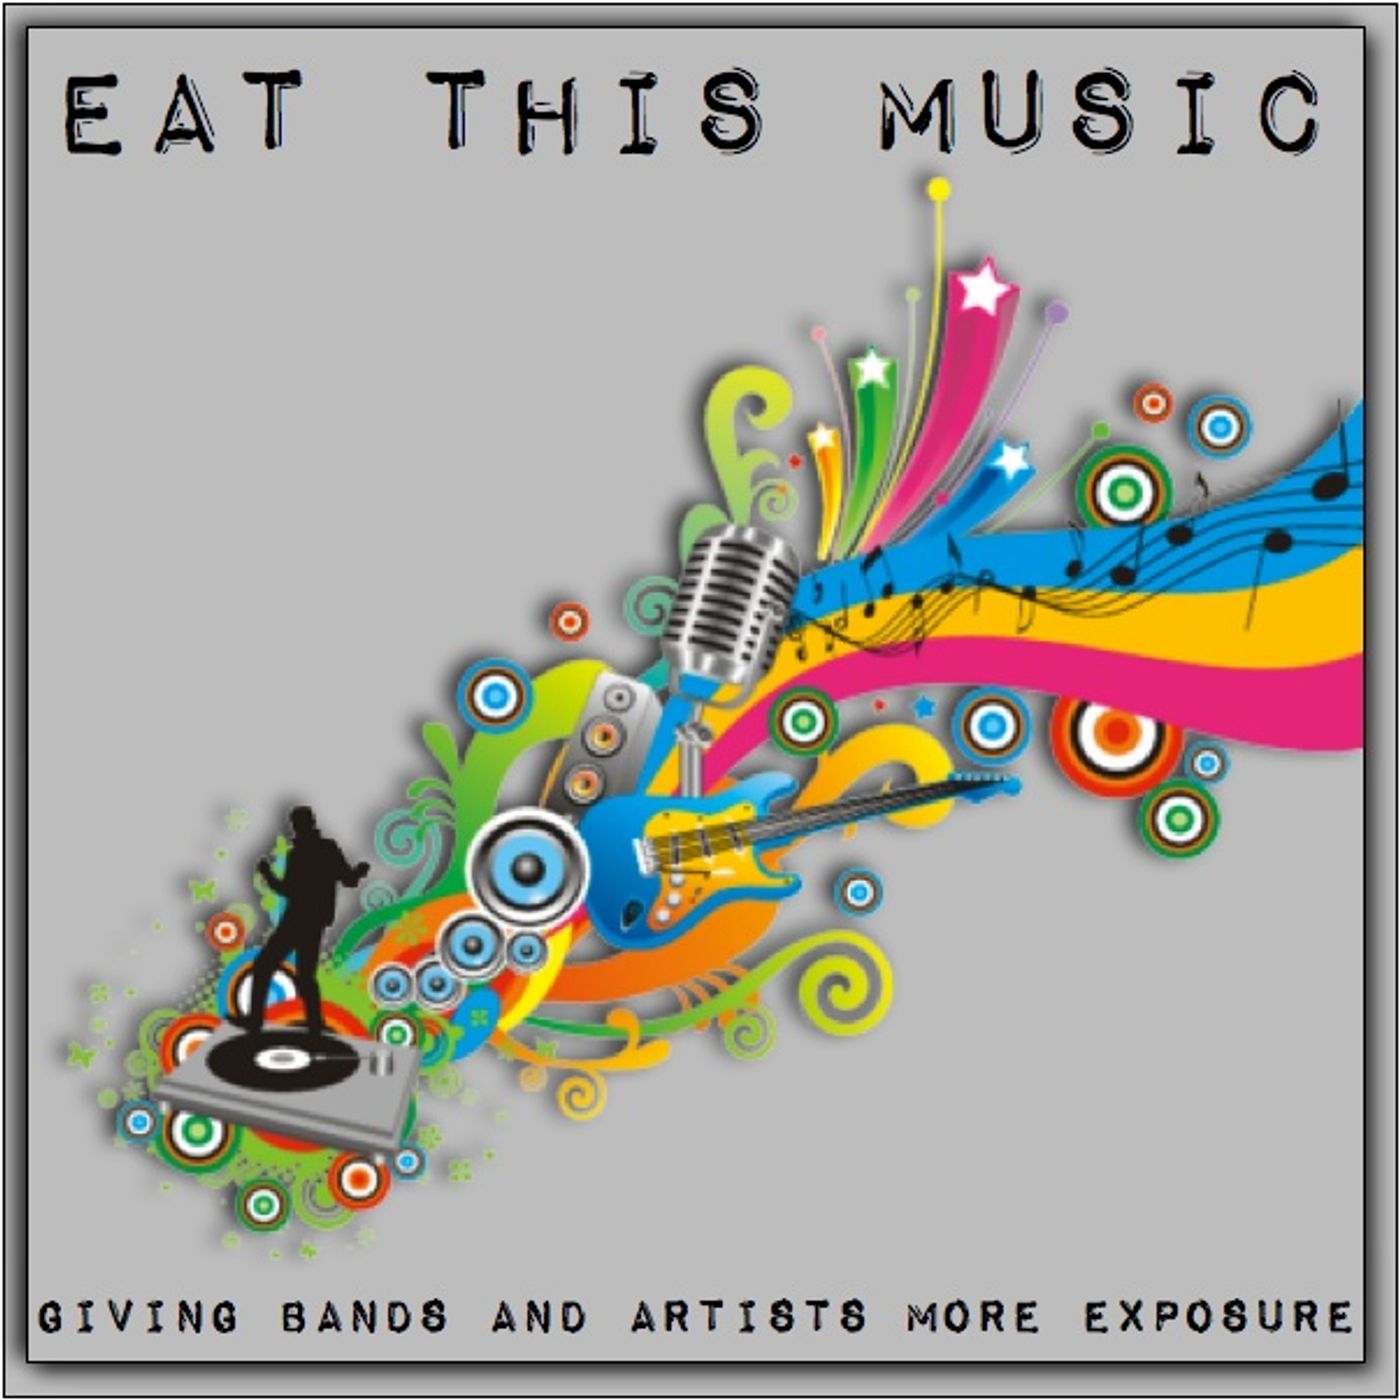 Eat This Music